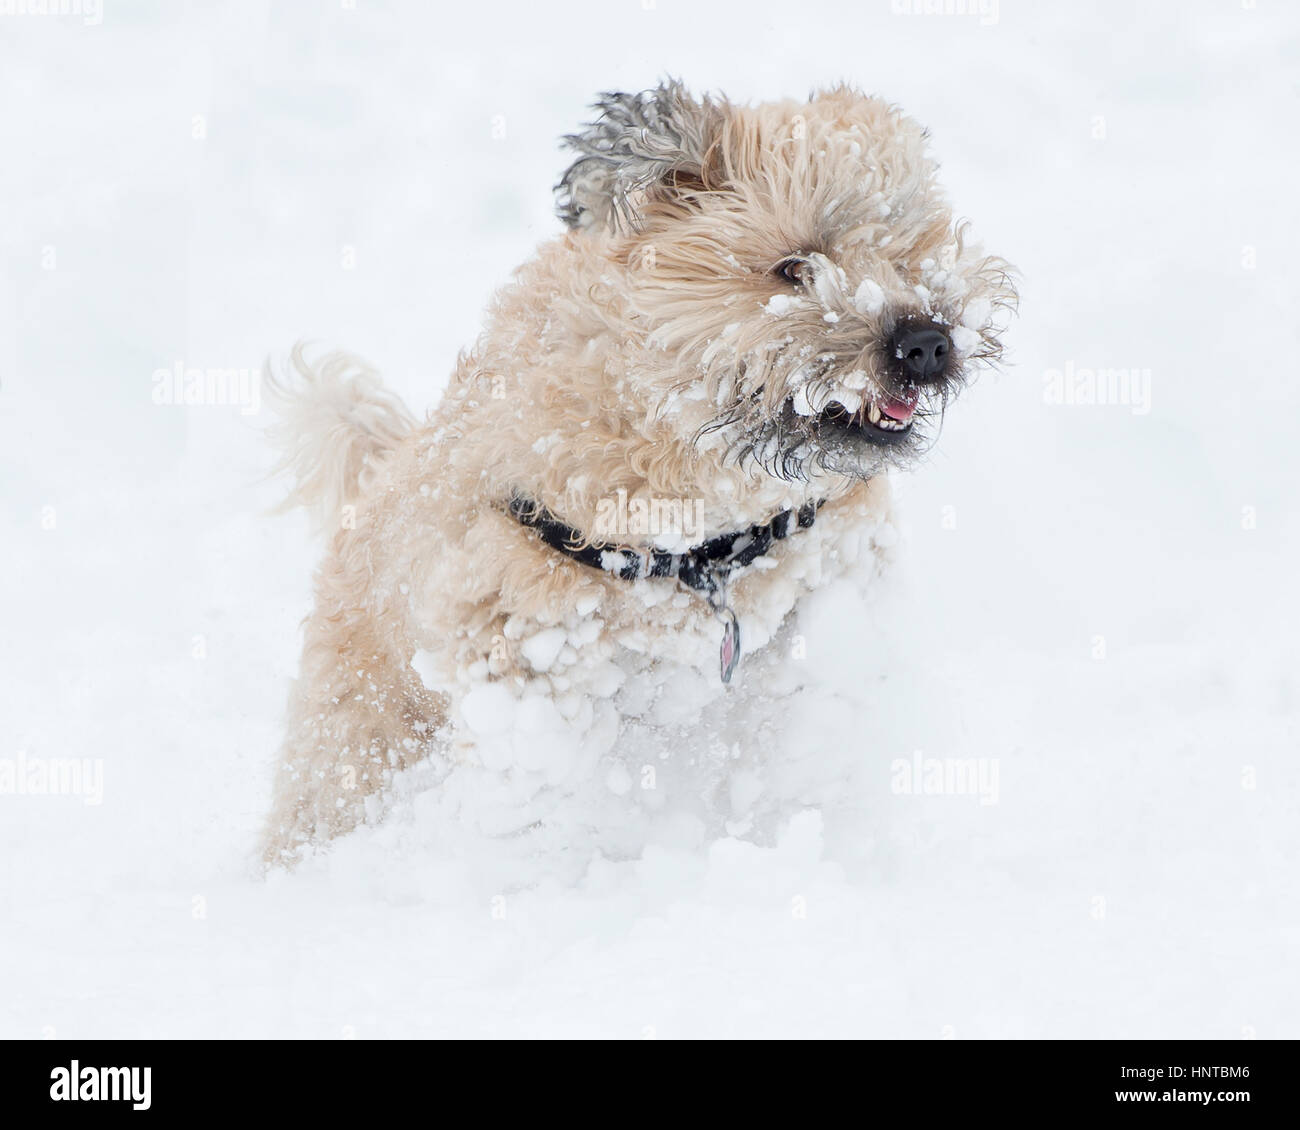 Uncut, untrimmed, unclipped adorable Wheaten Terrier dog running playing leaping posing in snow white background winter fun Stock Photo